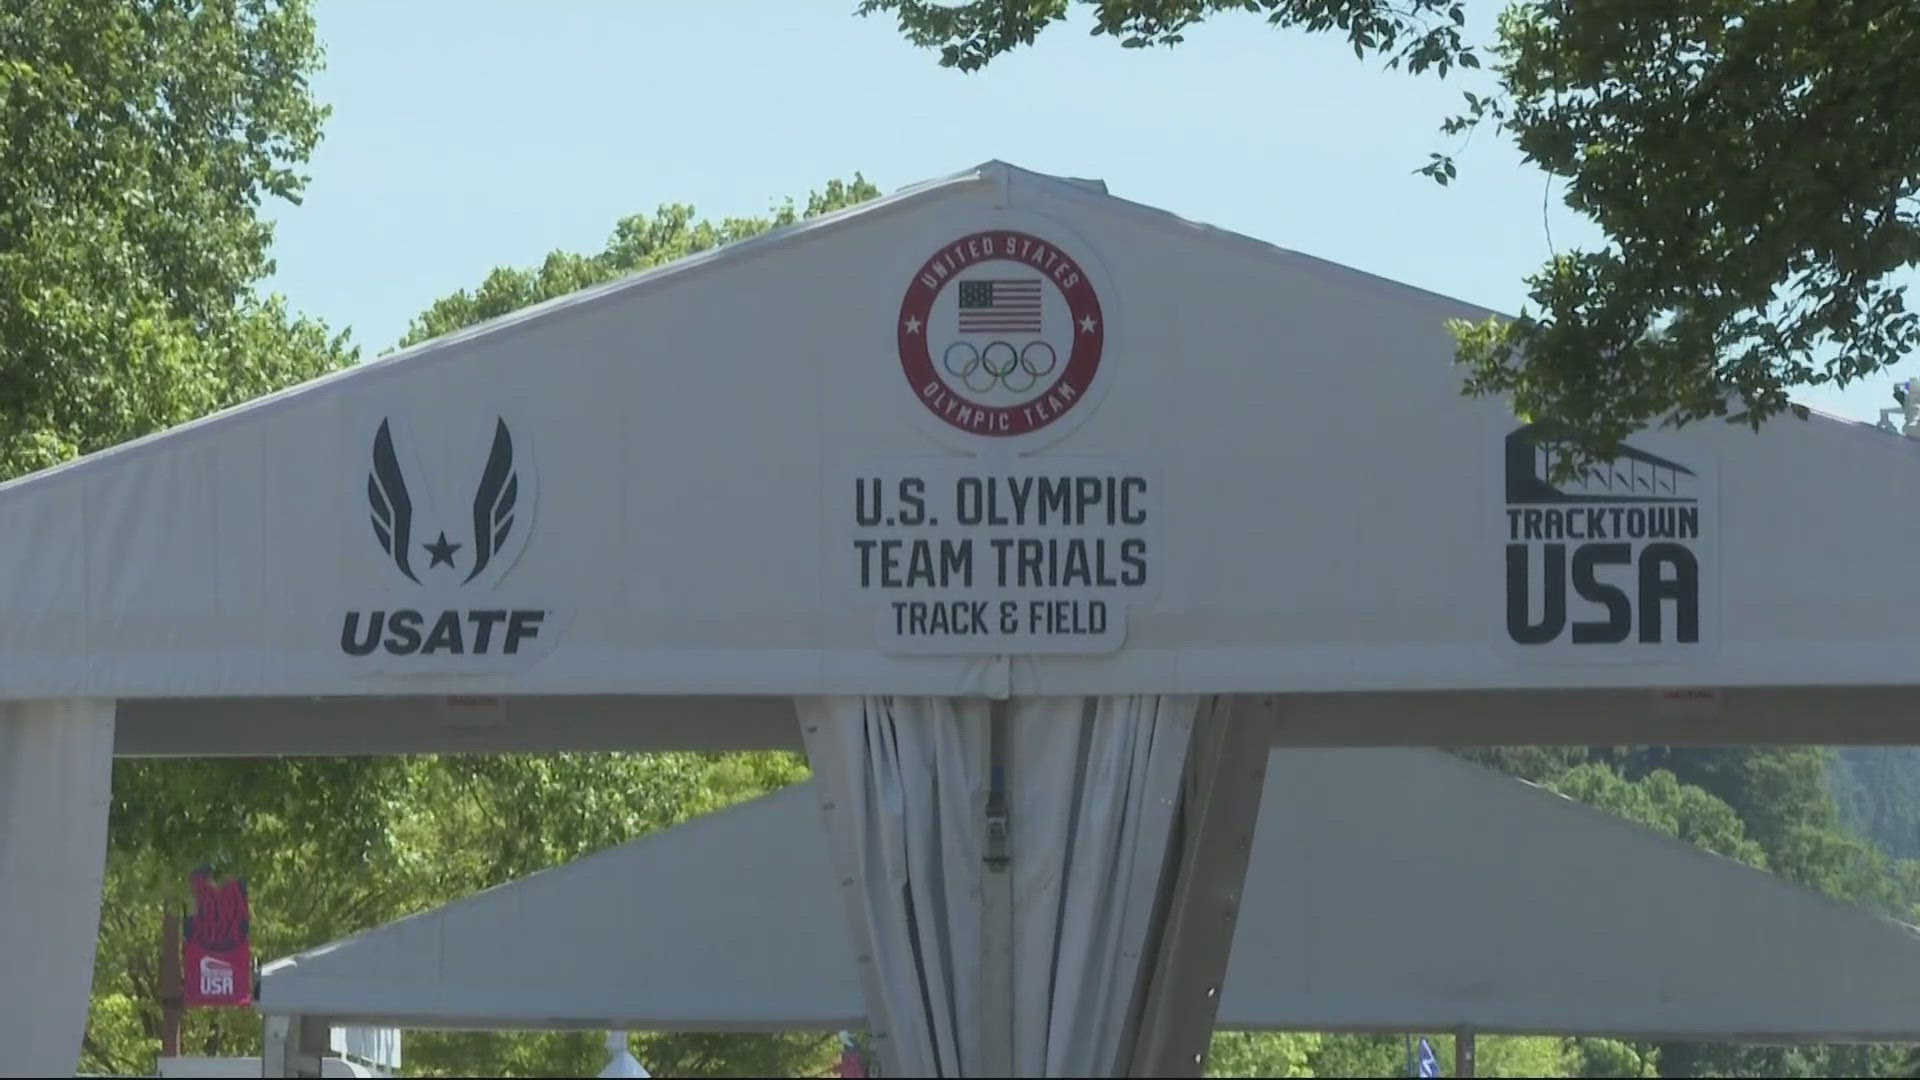 The track and field team trials for Team USA kicked off June 21 and will run though June 30.